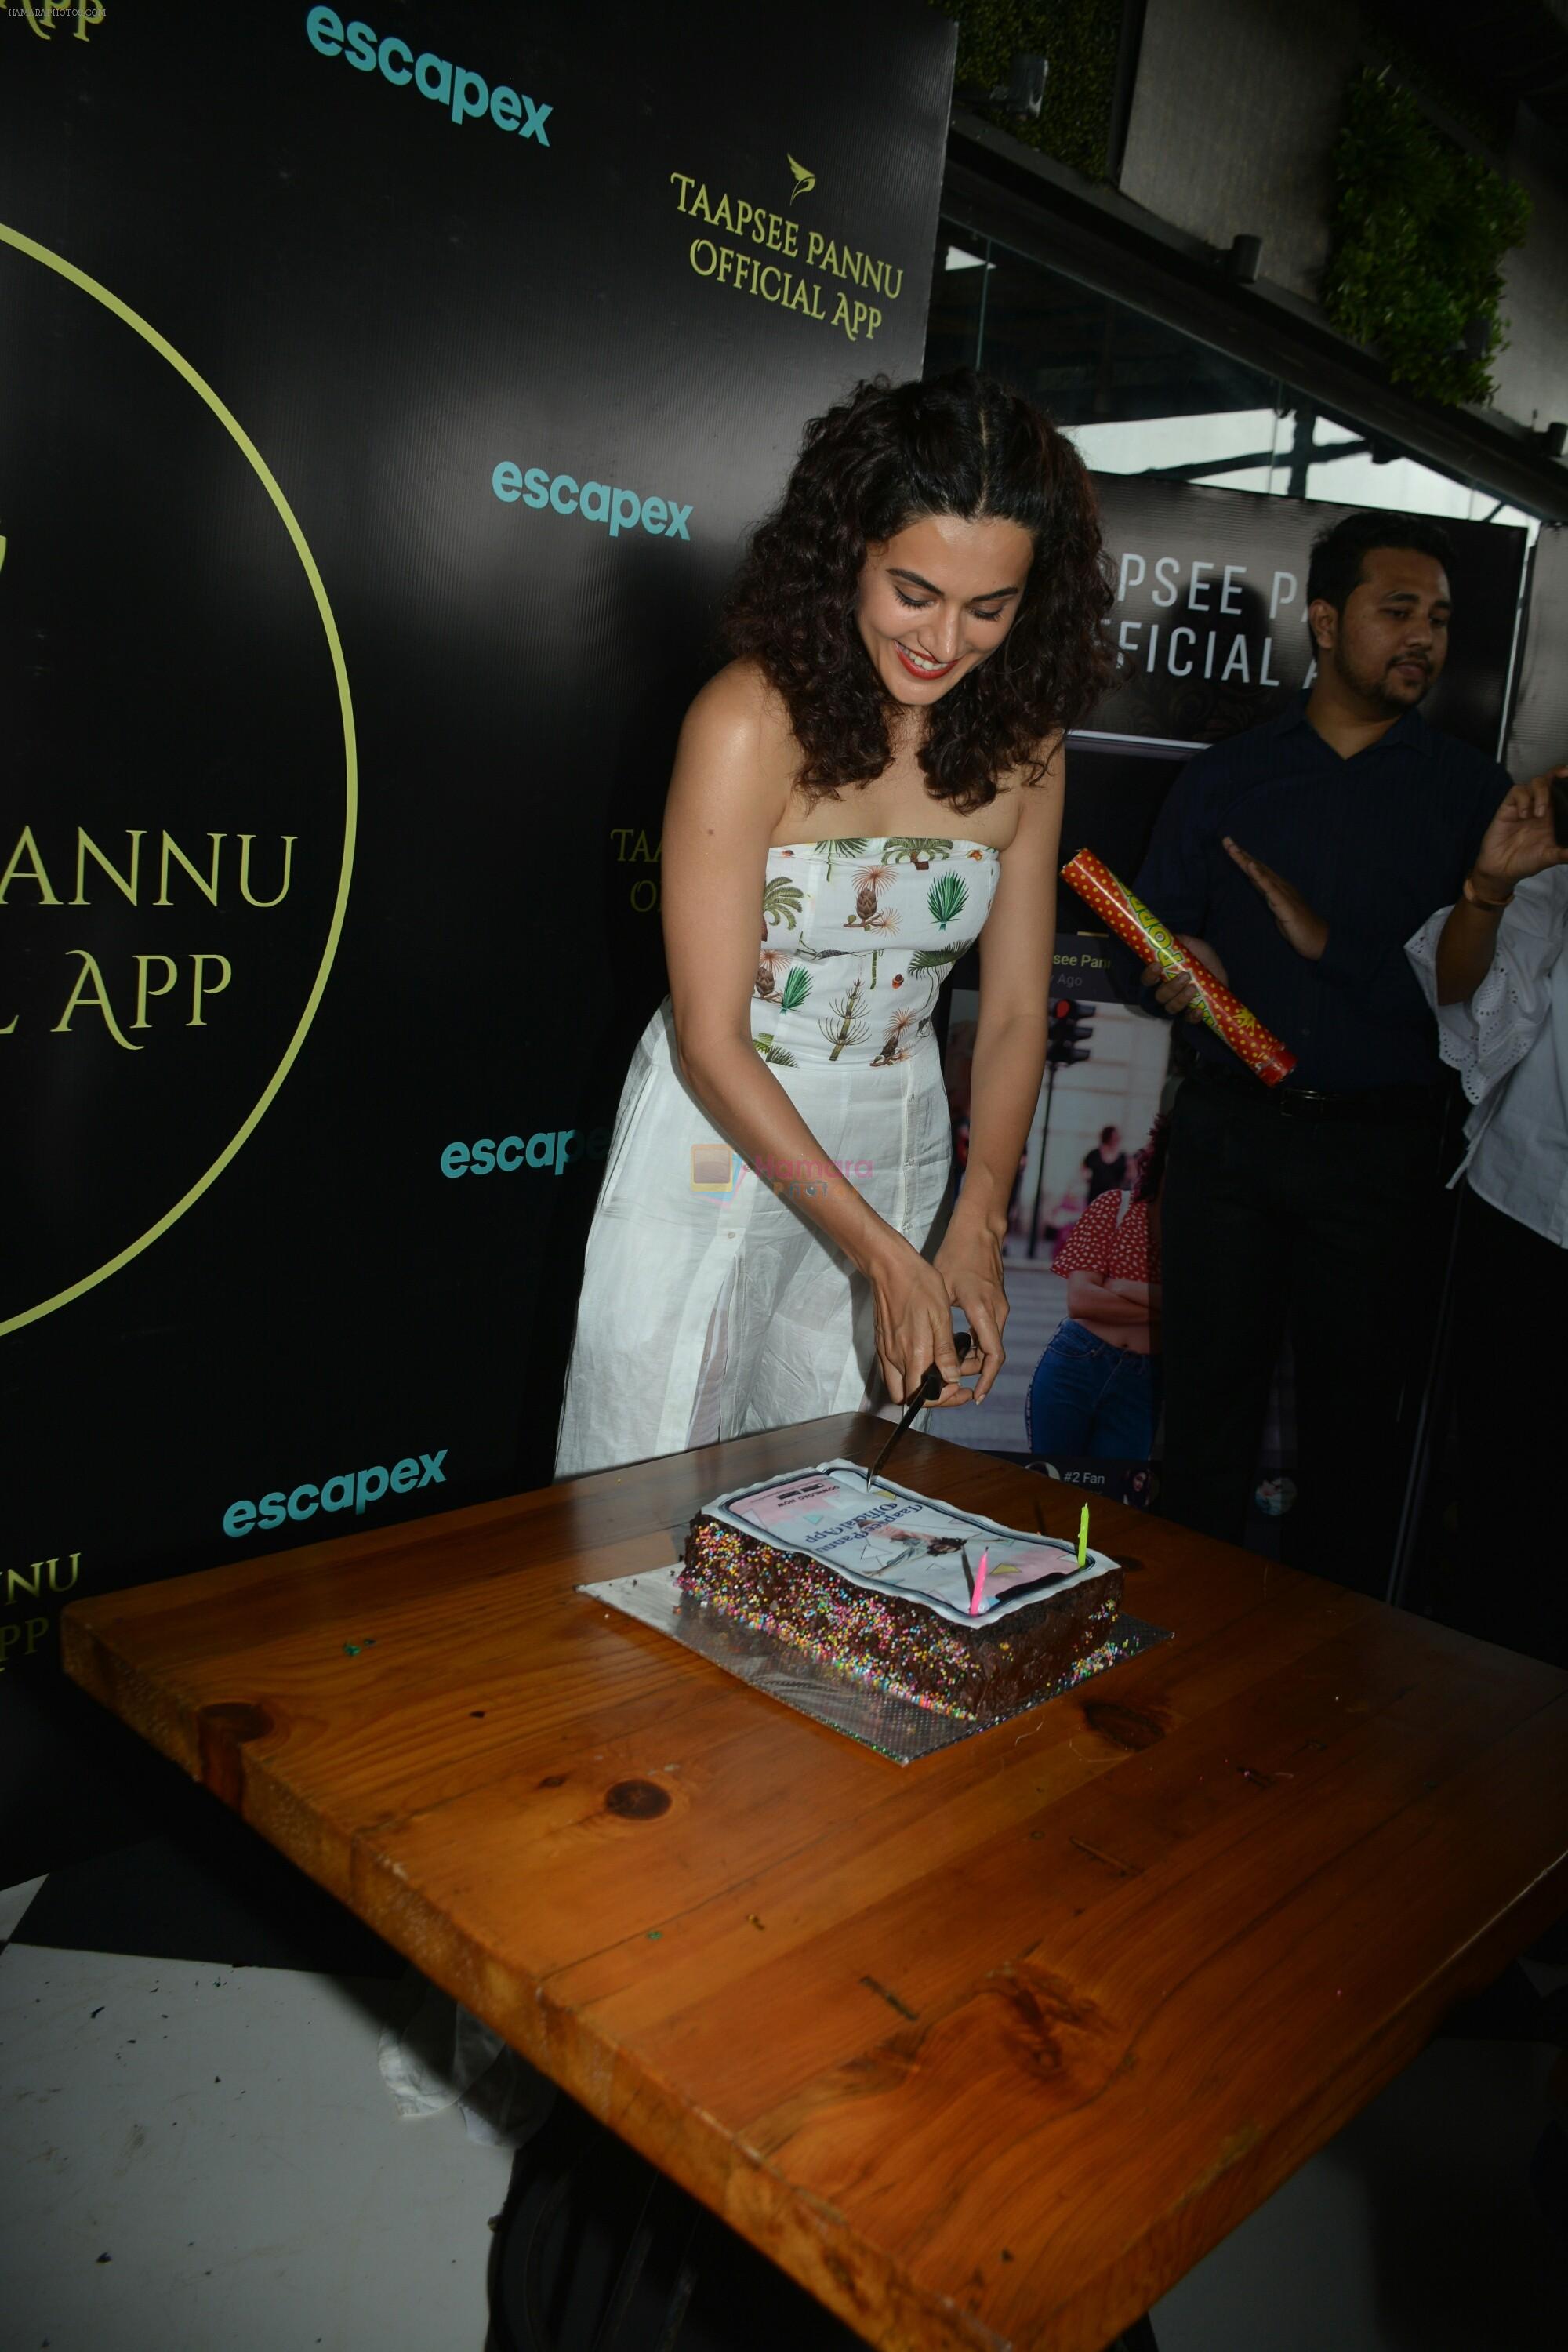 Taapsee Pannu official app launch at bombay adda bandra on 1st Aug 2018